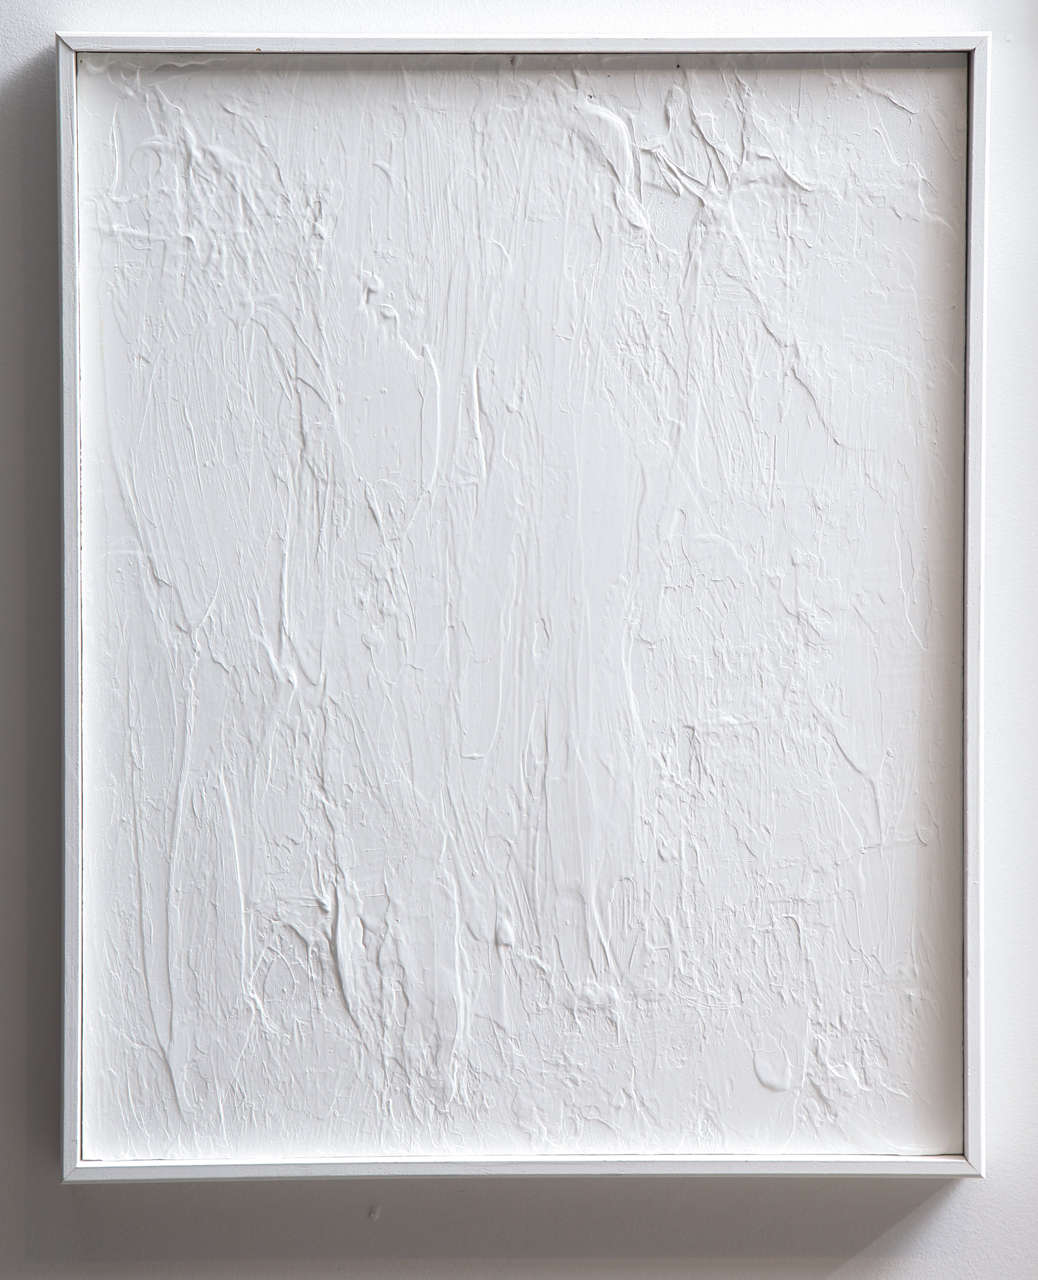 plaster relief and oil paint
on birch wood board
20 x 16